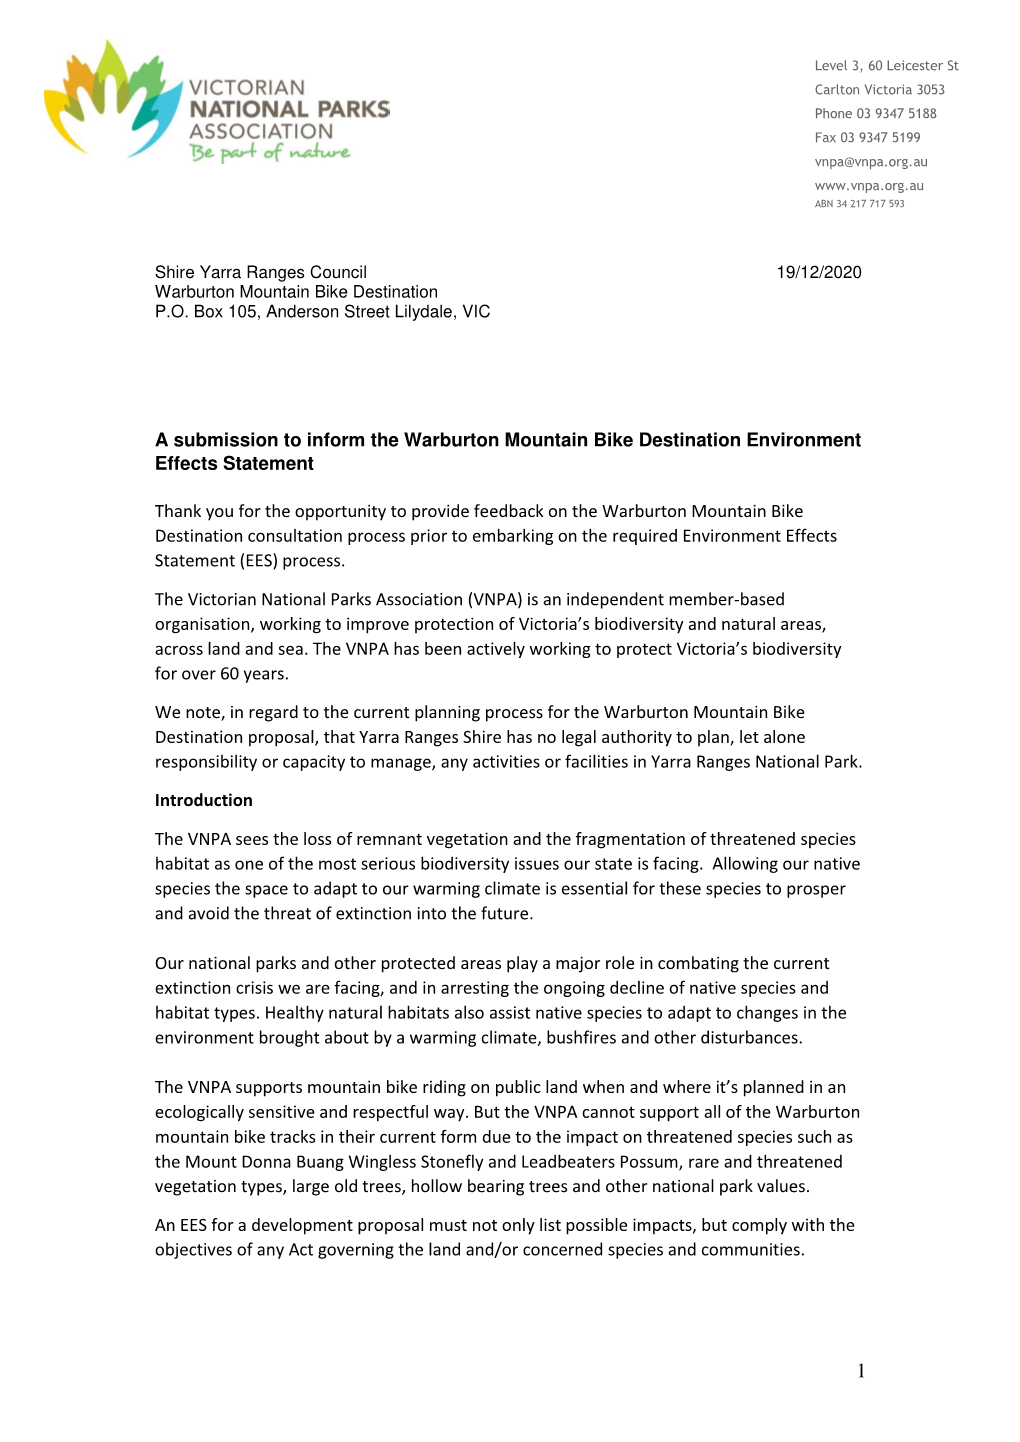 A Submission to Inform the Warburton Mountain Bike Destination Environment Effects Statement